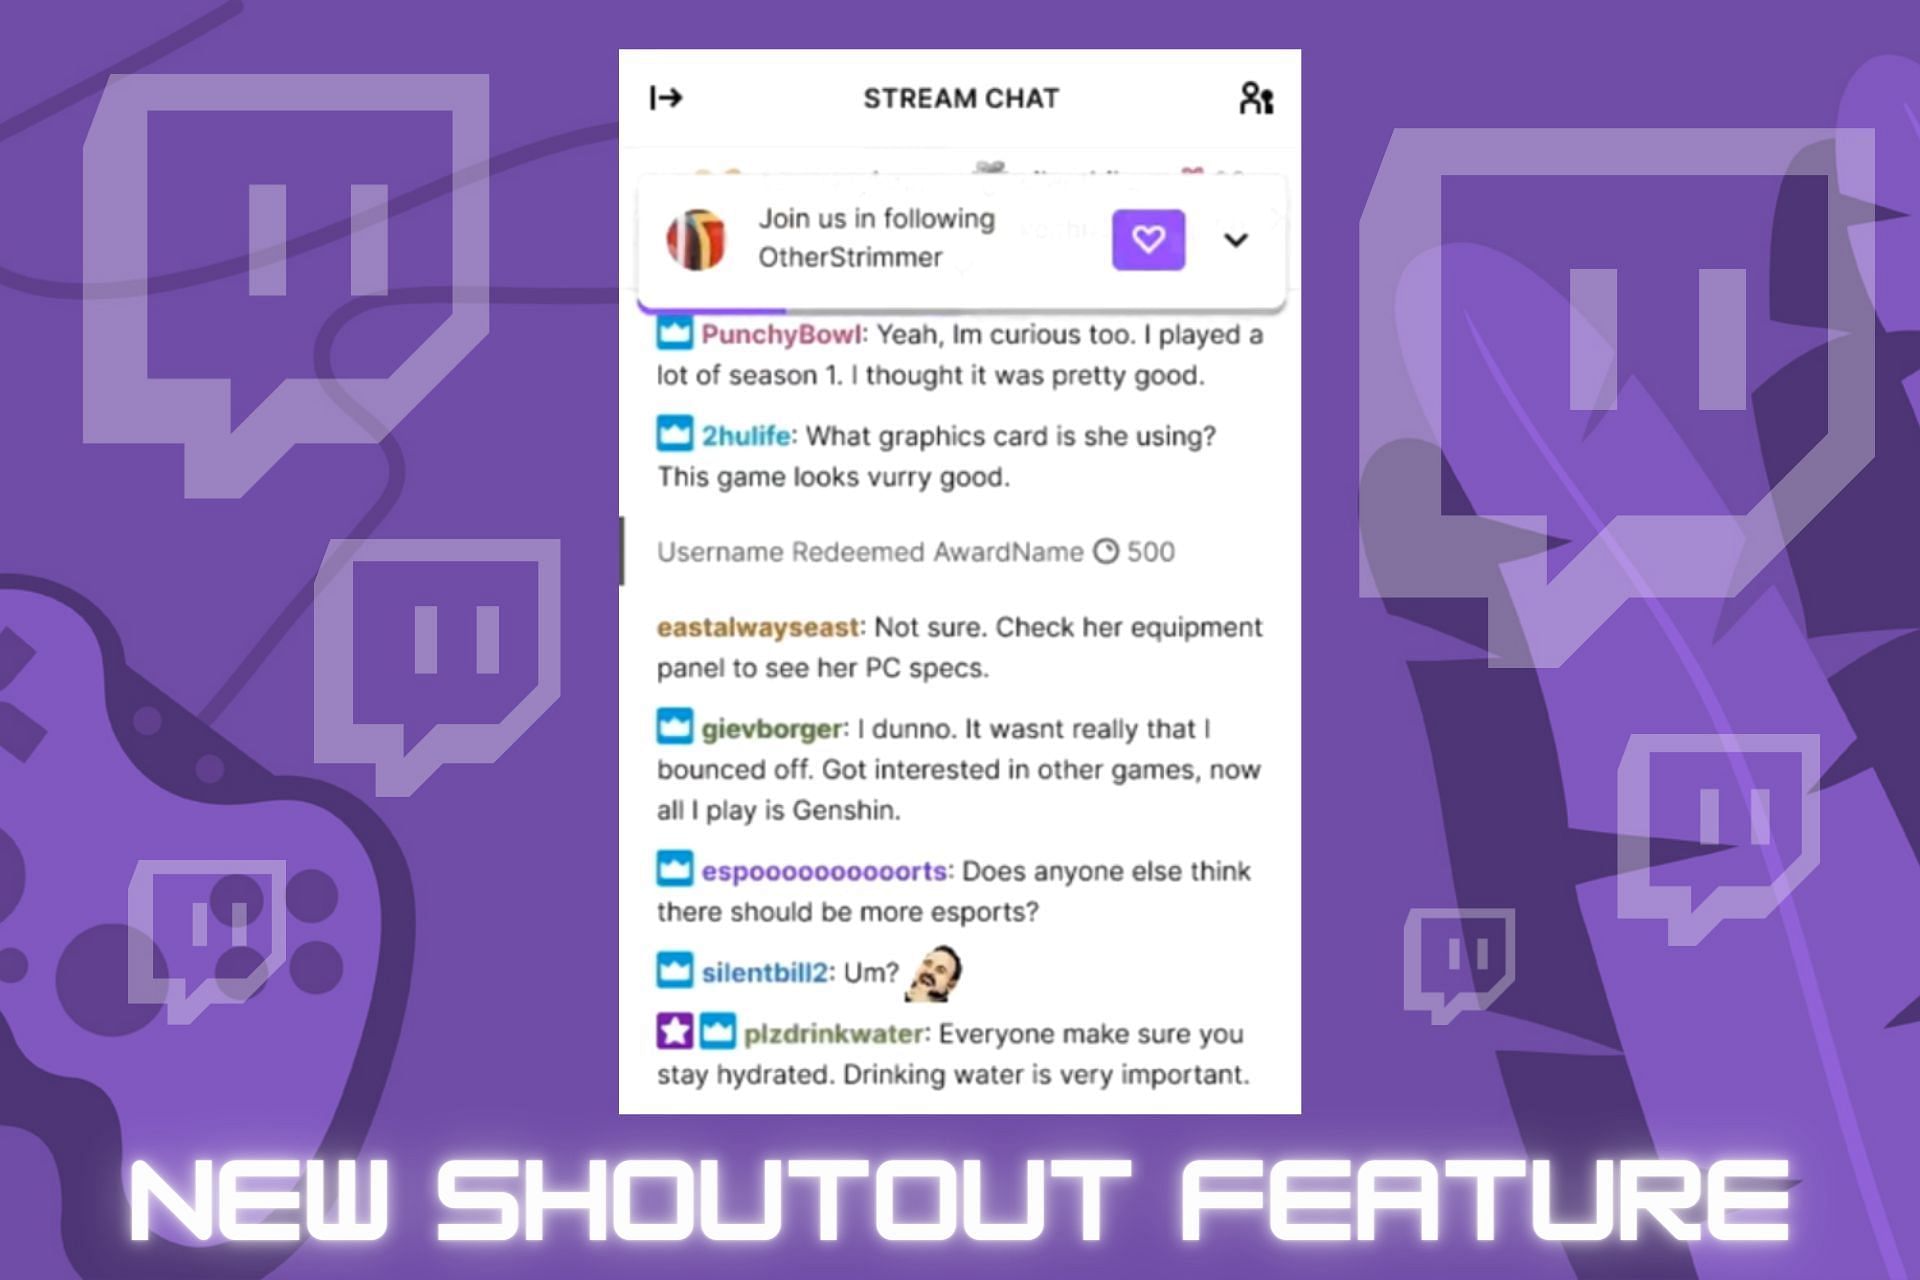 Twitch introduces "shoutout", a new way to follow other streamers on